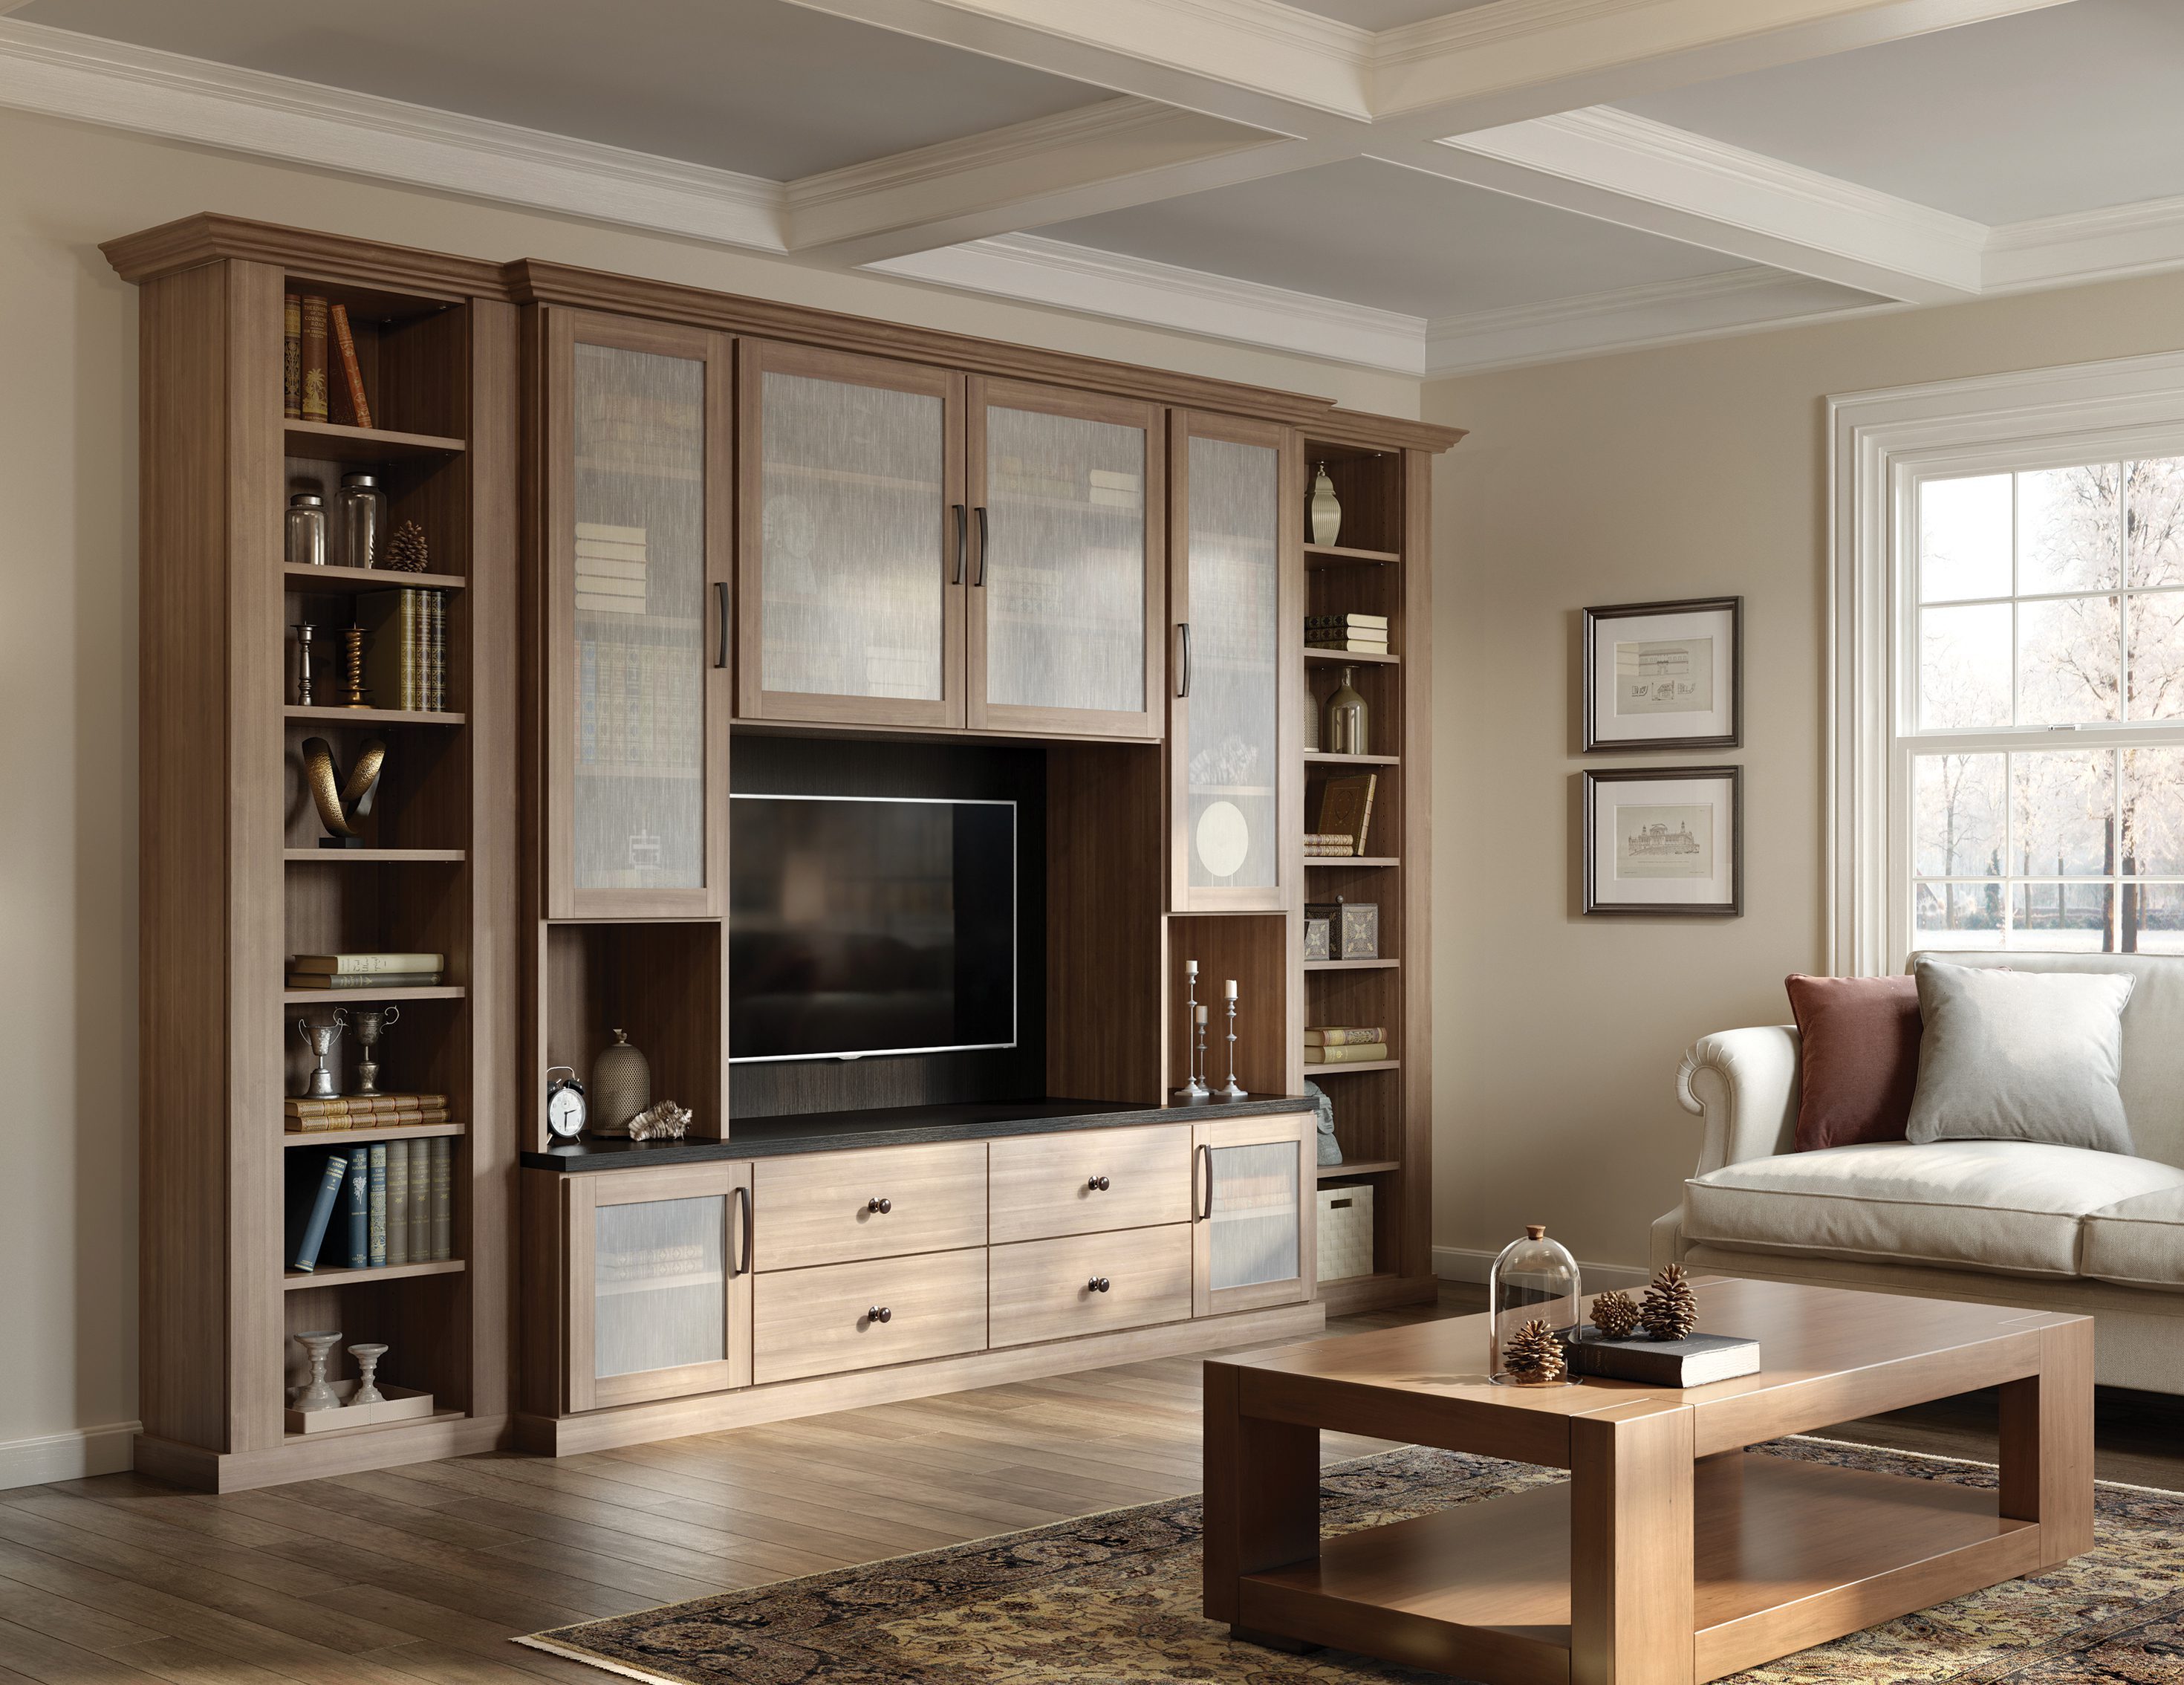 Family Room Cabinets & Storage Solutions | California Closets